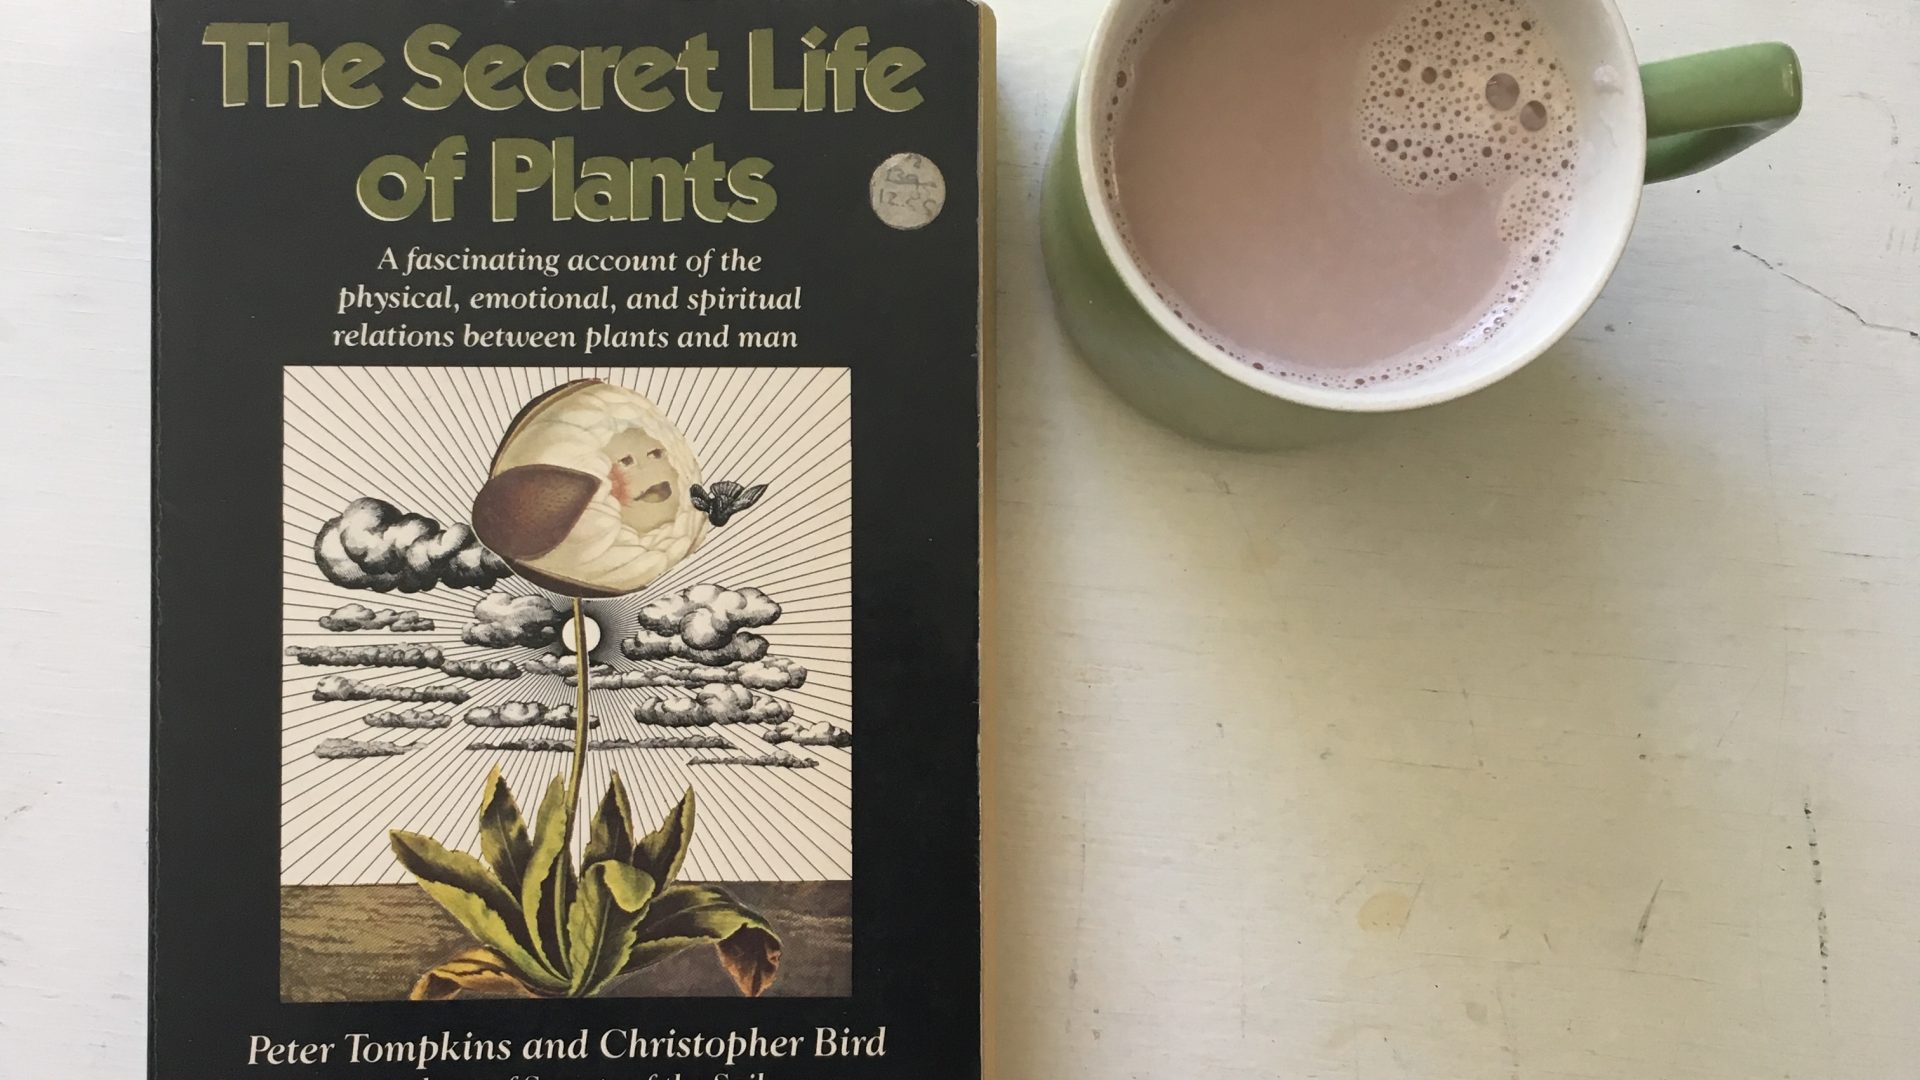 Front cover of the book "The secret Life of Plants" with a mug of hot chocolate beside it.